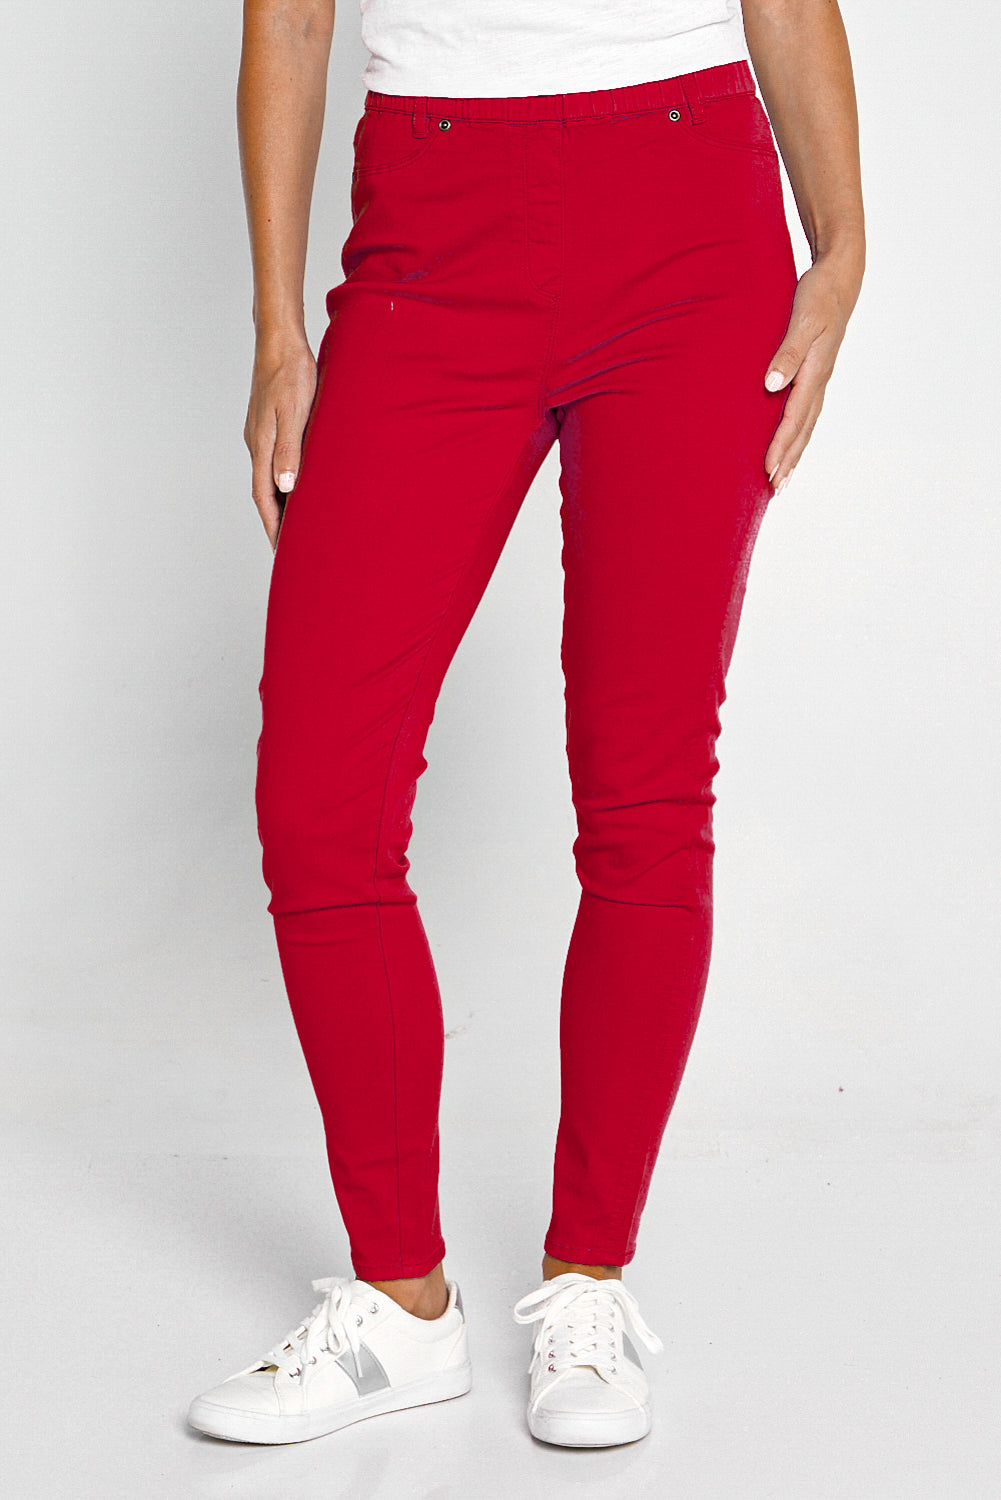 Deewa Red Jegging at Rs 230, Cotton Jeggings in Noida